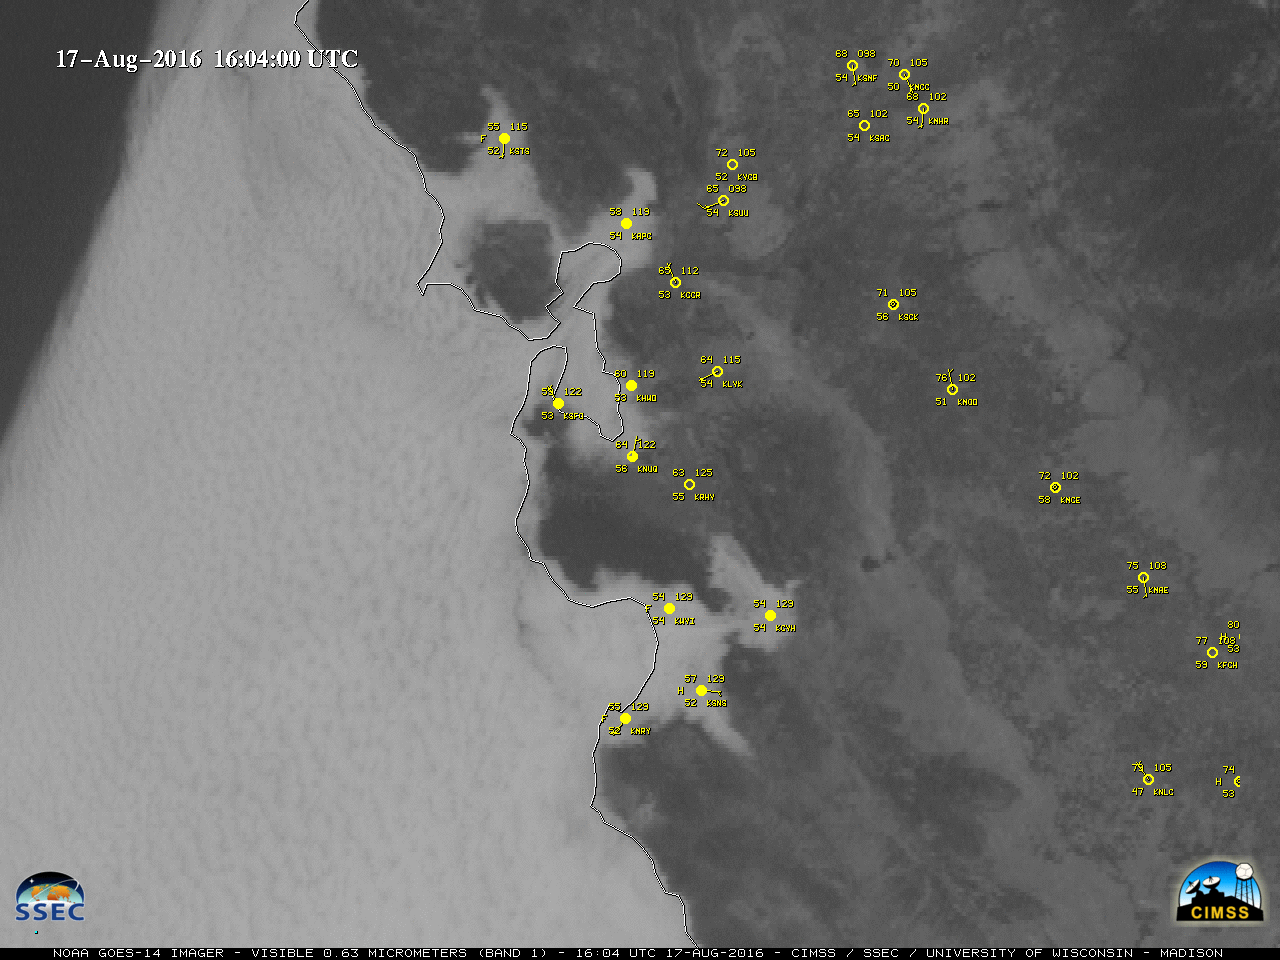 GOES-14 Visible (0.63 µm) images, with hourly plots of surface reports in yellow [click to play MP4 animation]